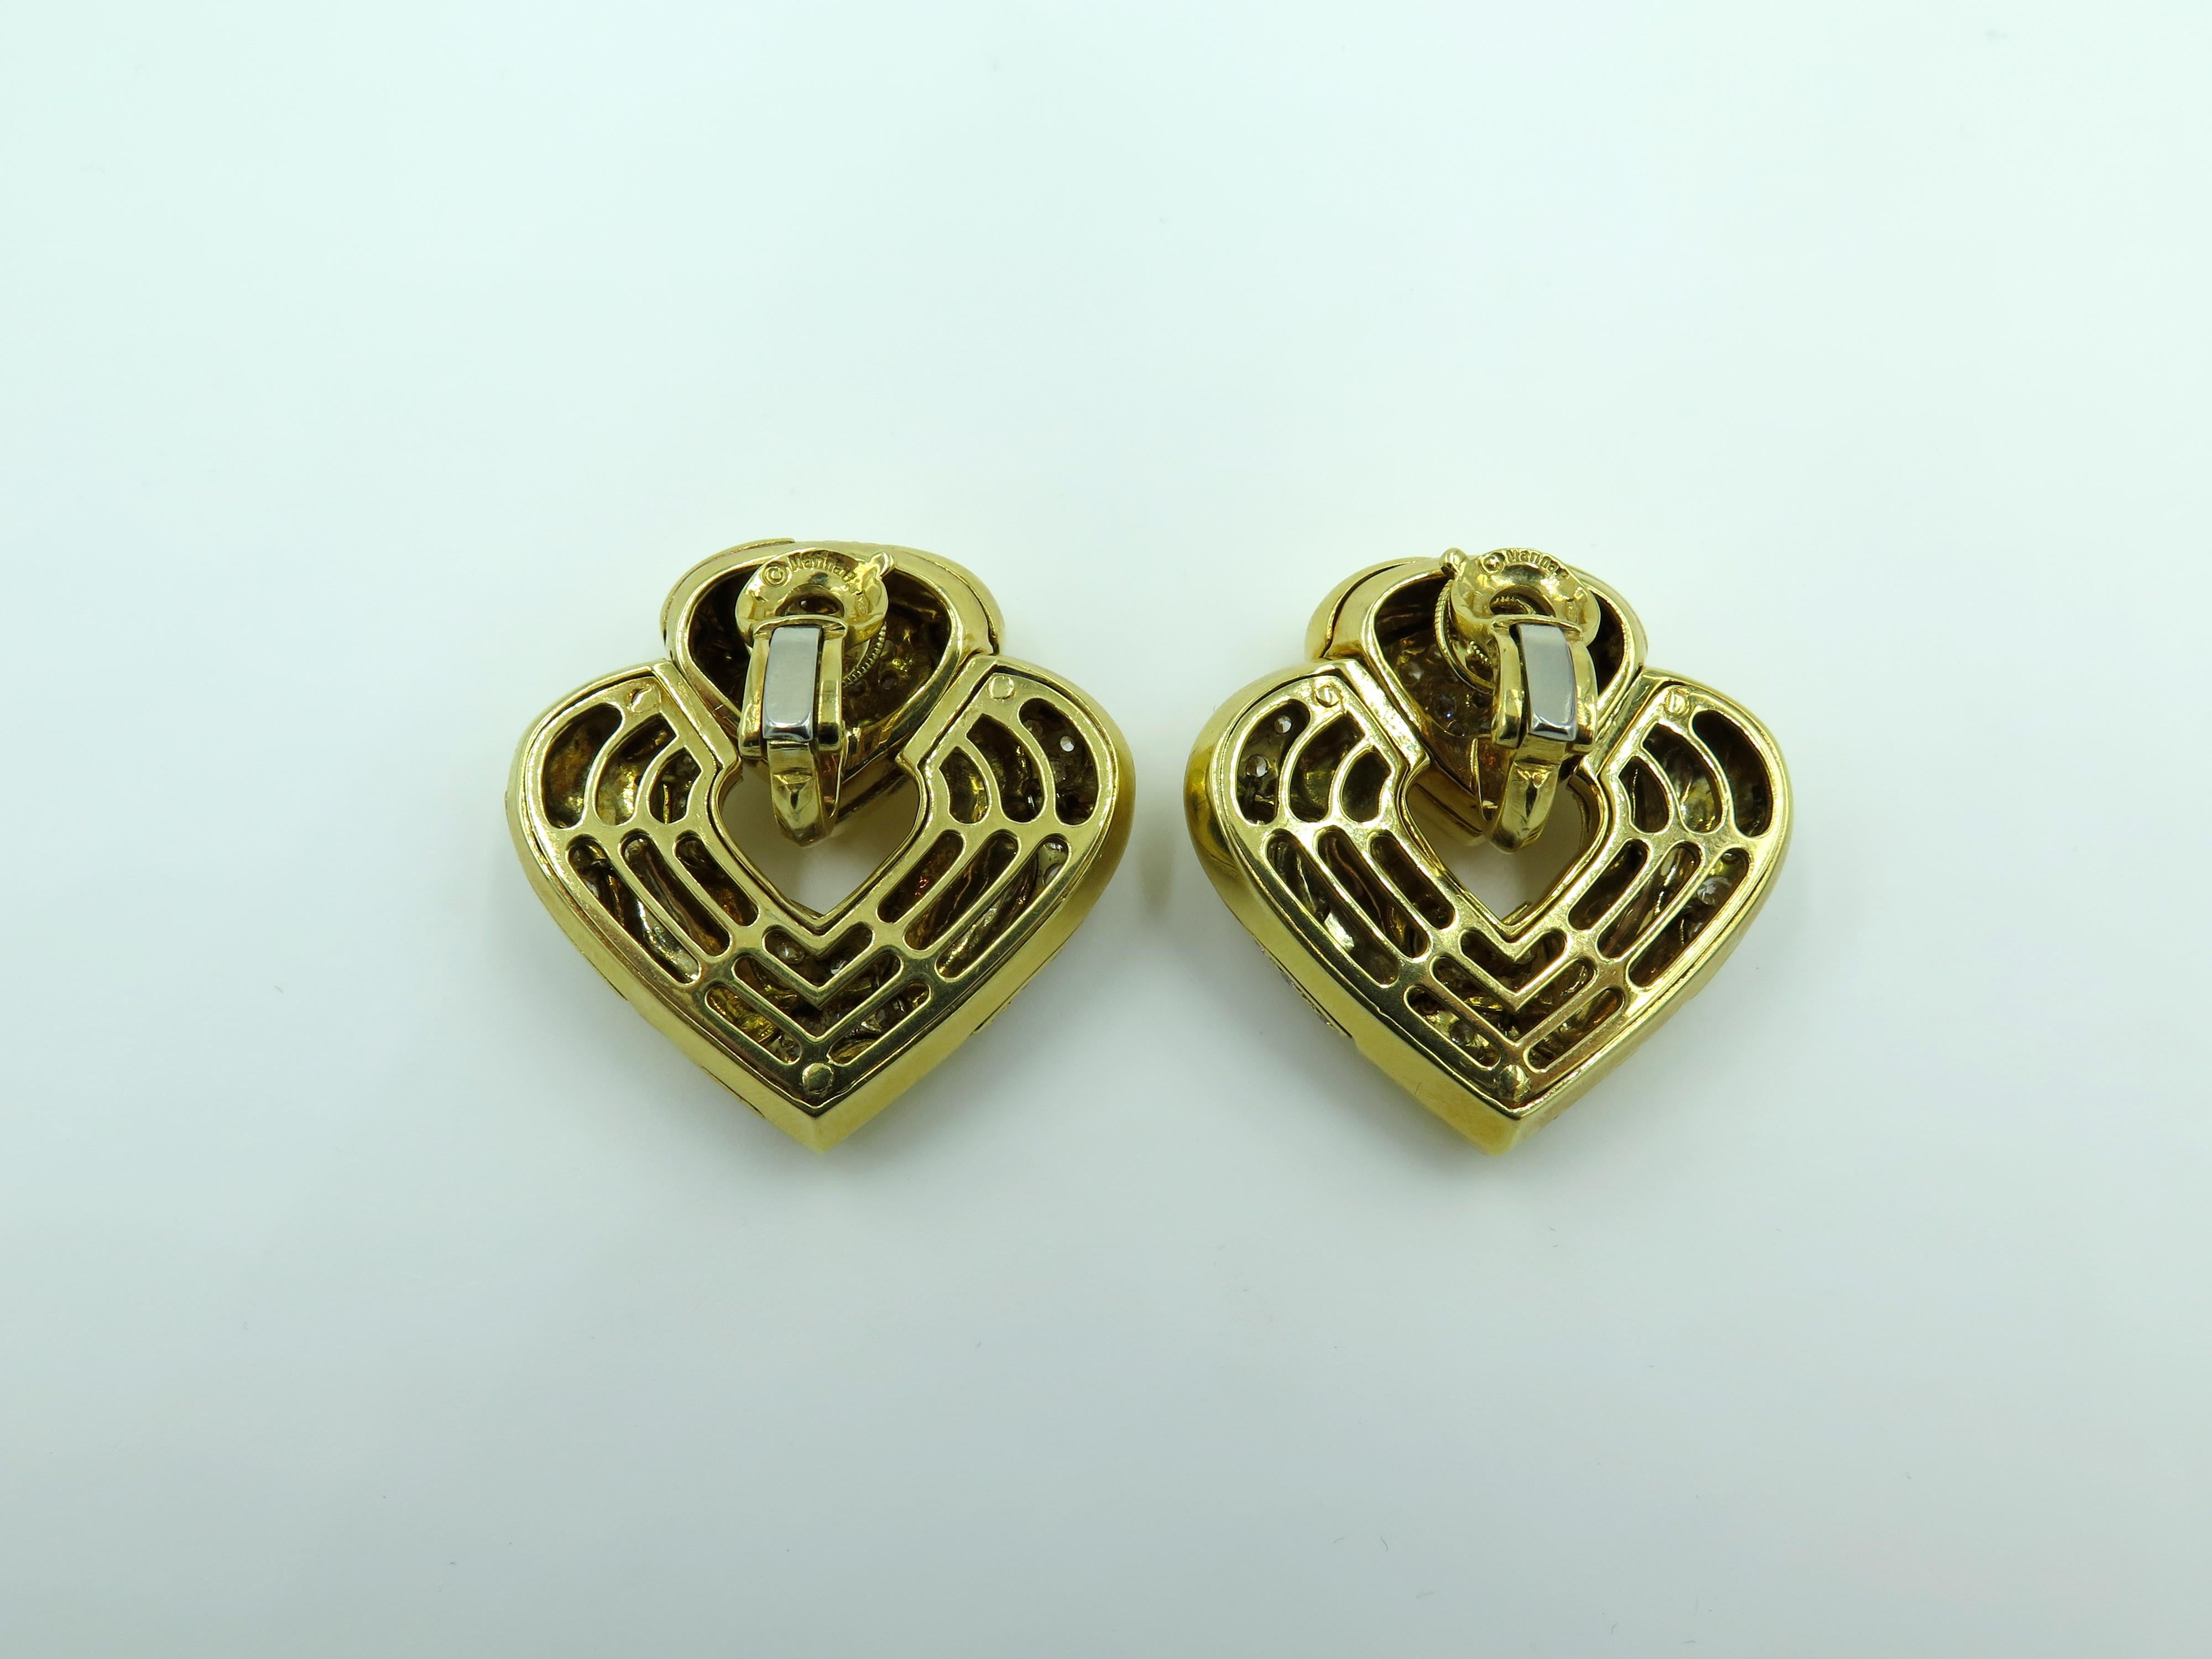 A pair of 18 karat yellow gold and diamond Pardy earrings. Marina B. Circa 1980. Of polished heart shaped door knocker design, enhanced by pave set diamonds. One hundred and fifteen diamonds weigh approximately 3.45 carats. Length is approximately 1